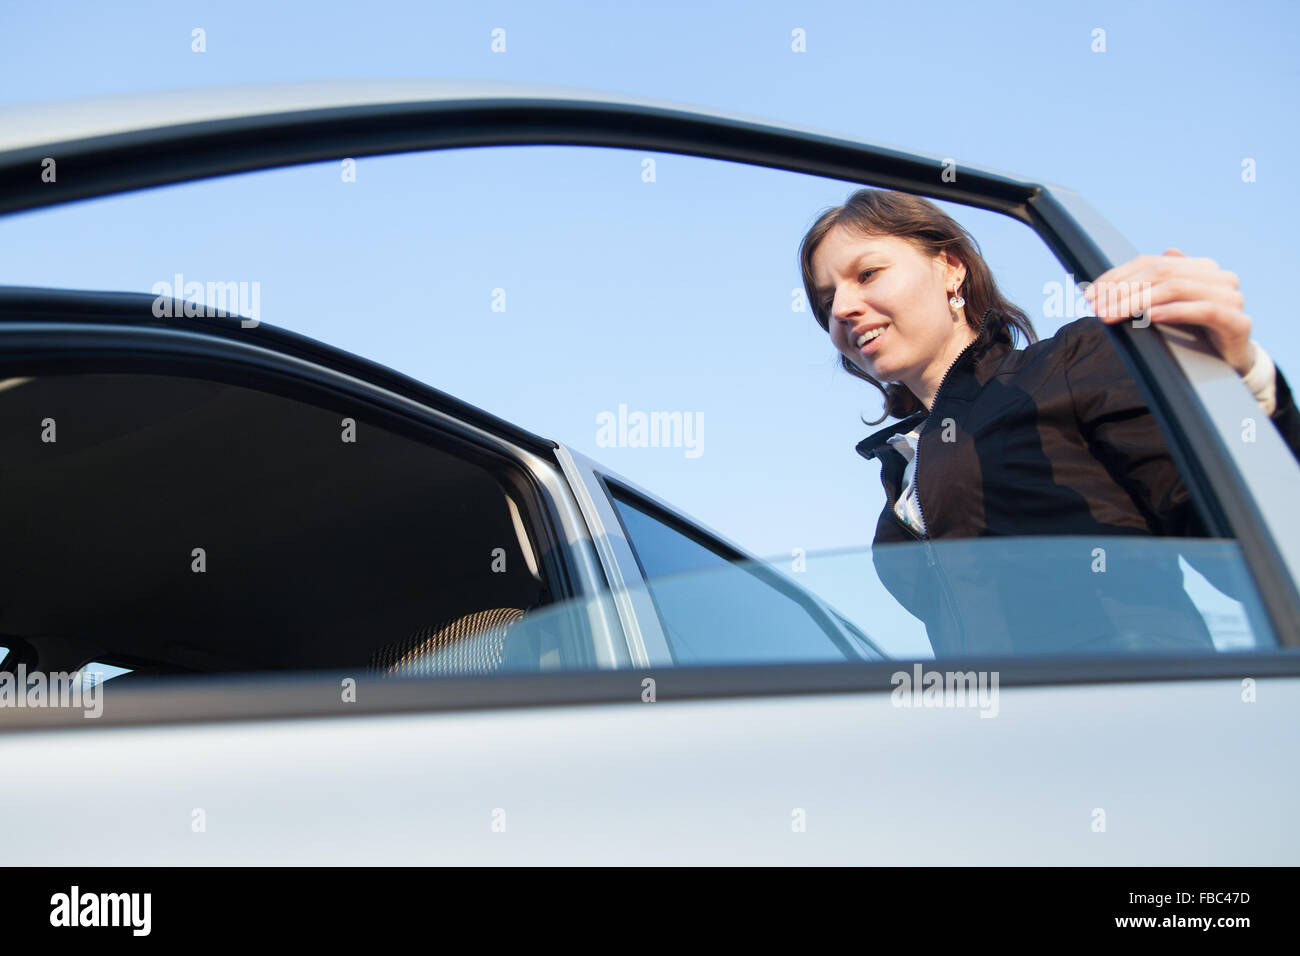 Candid shot of woman opening door of her car before getting in, ready for a ride Stock Photo